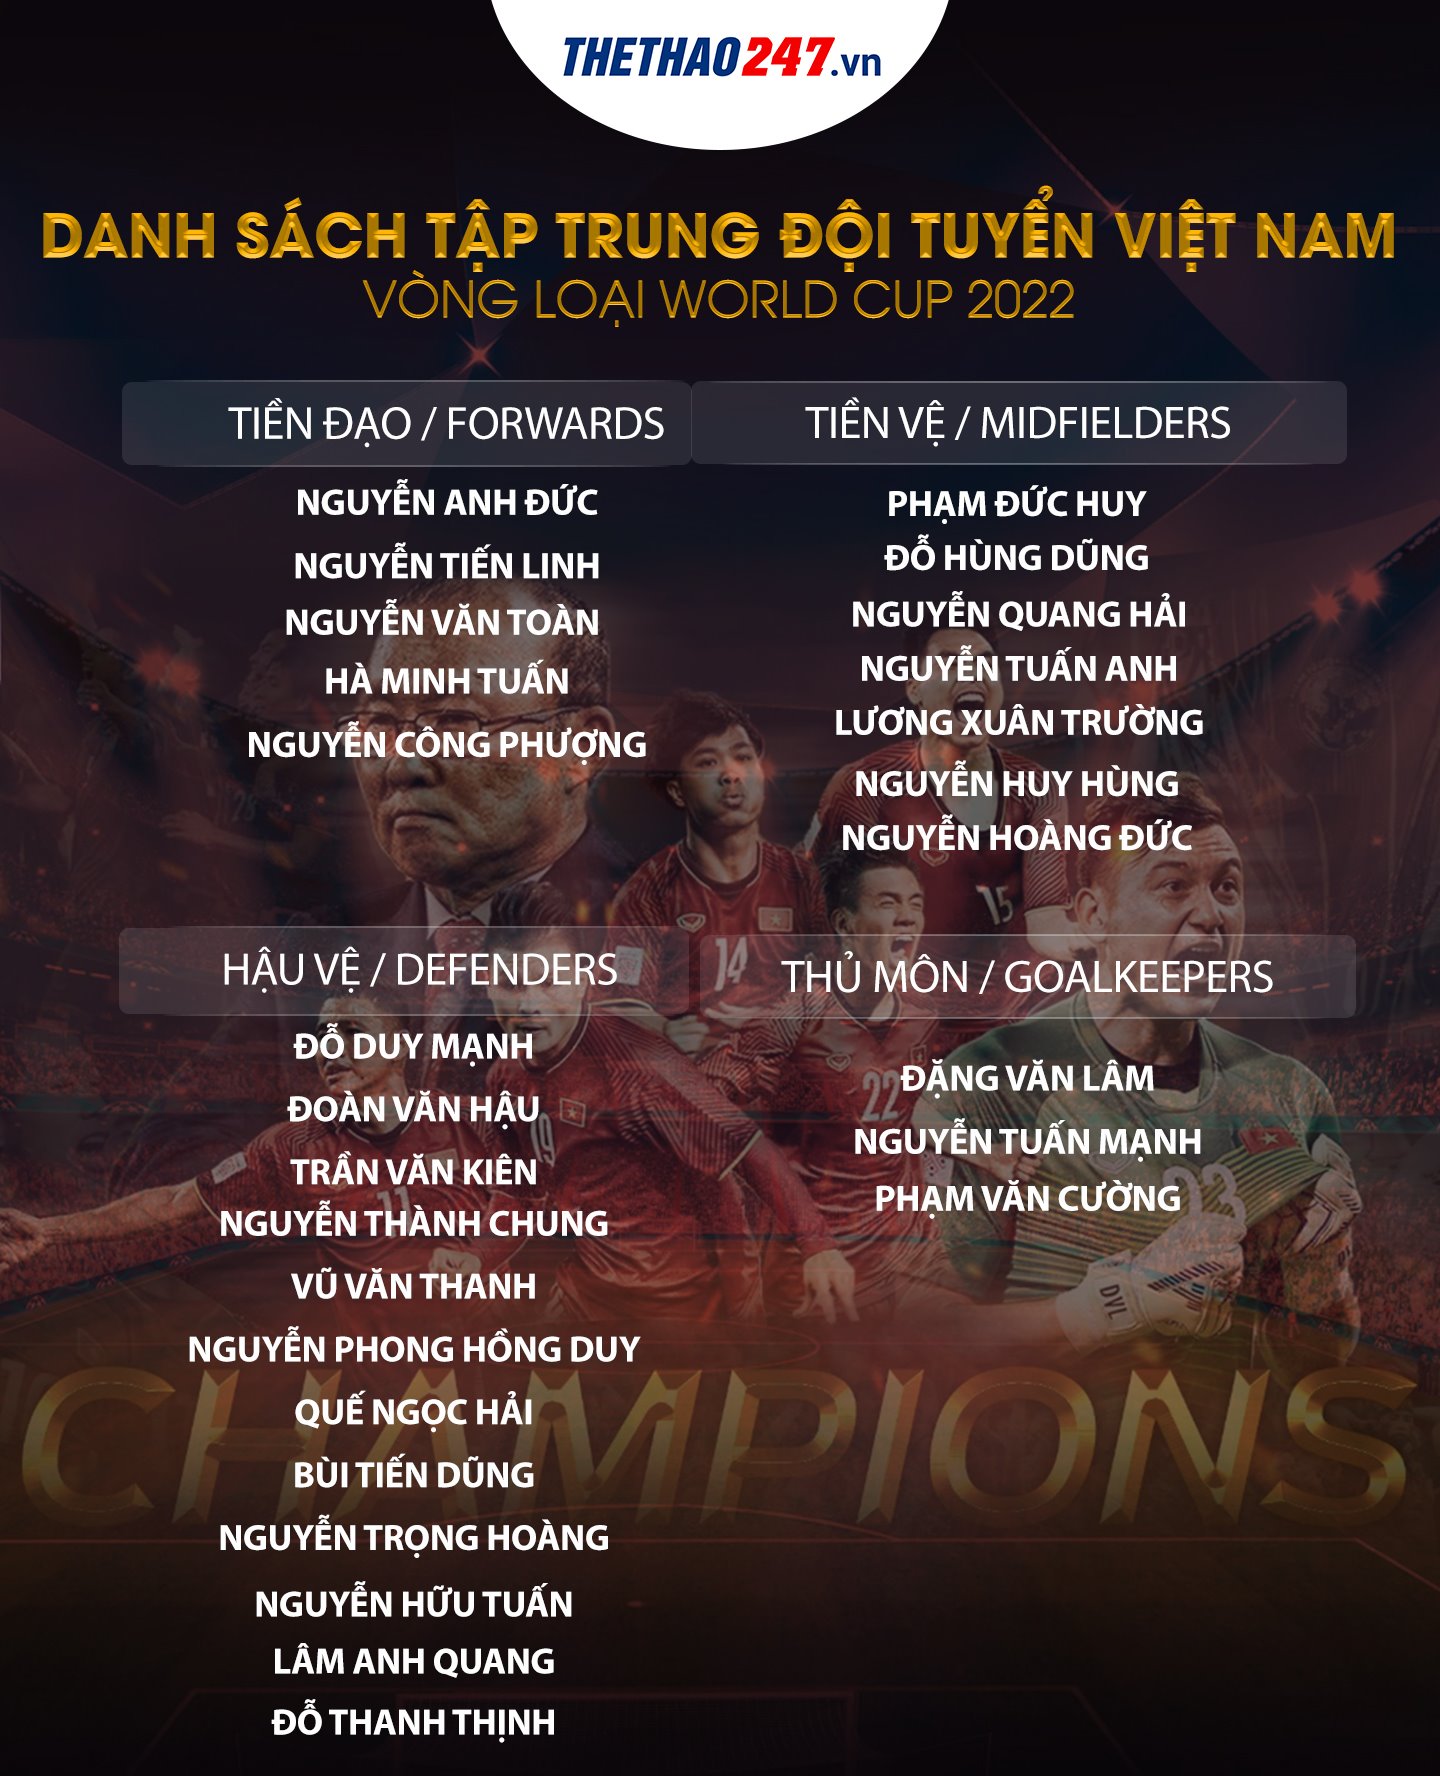 The Vietnam squad list ahead of the confrontation against Thailand.